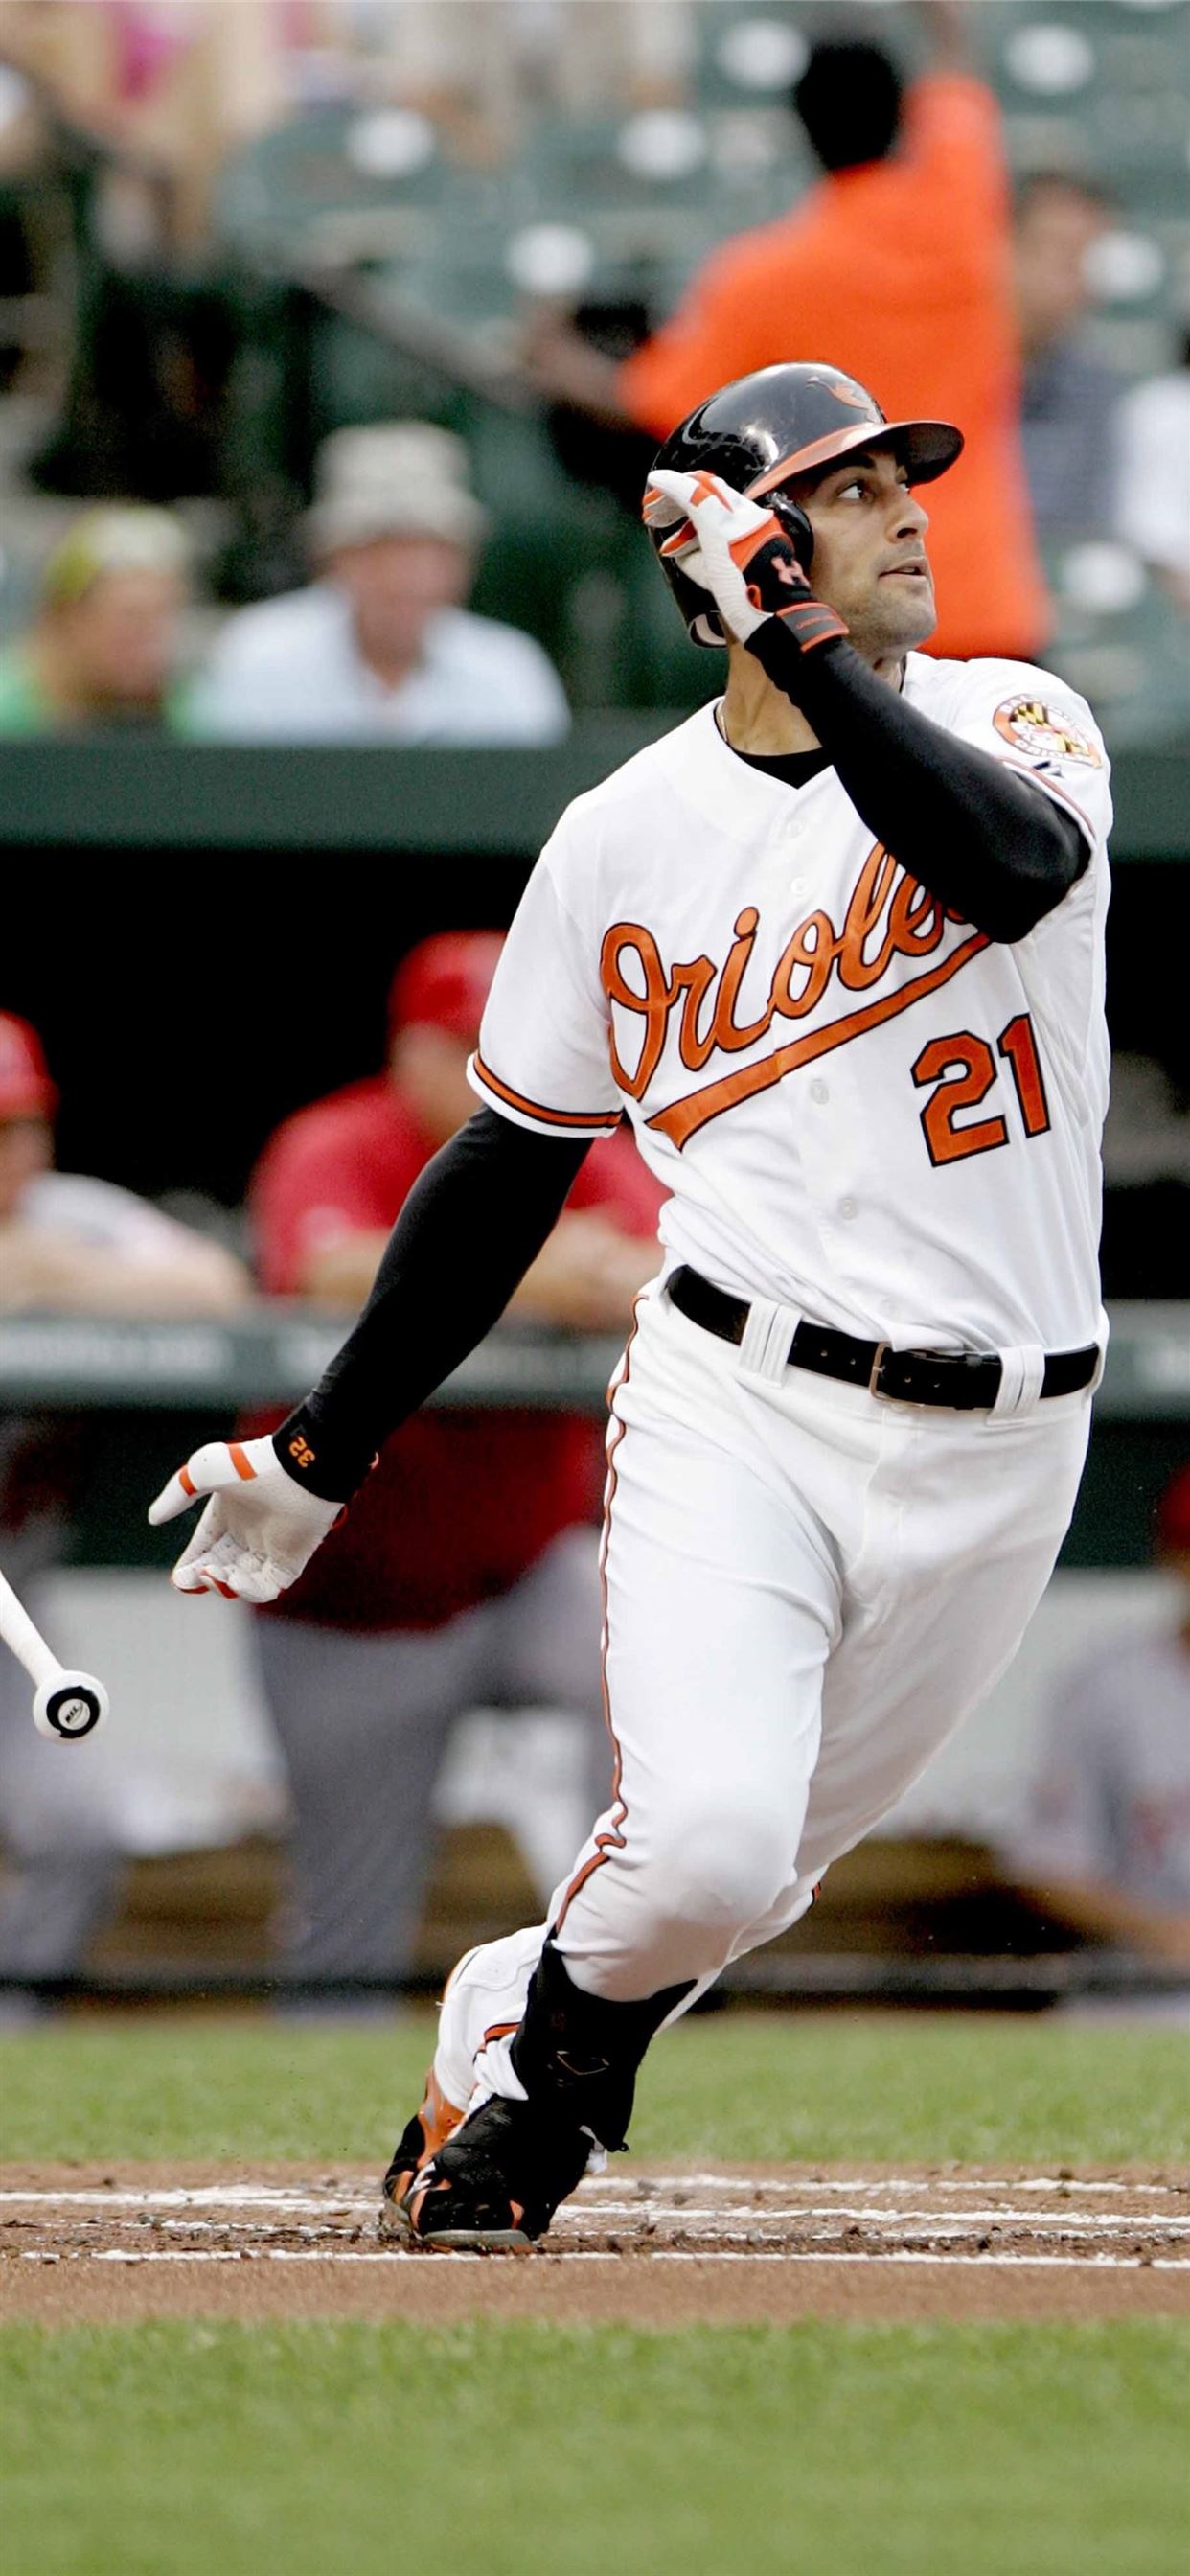 Baltimore Orioles, Sports team, iPhone wallpapers, Team logo, 1250x2690 HD Handy